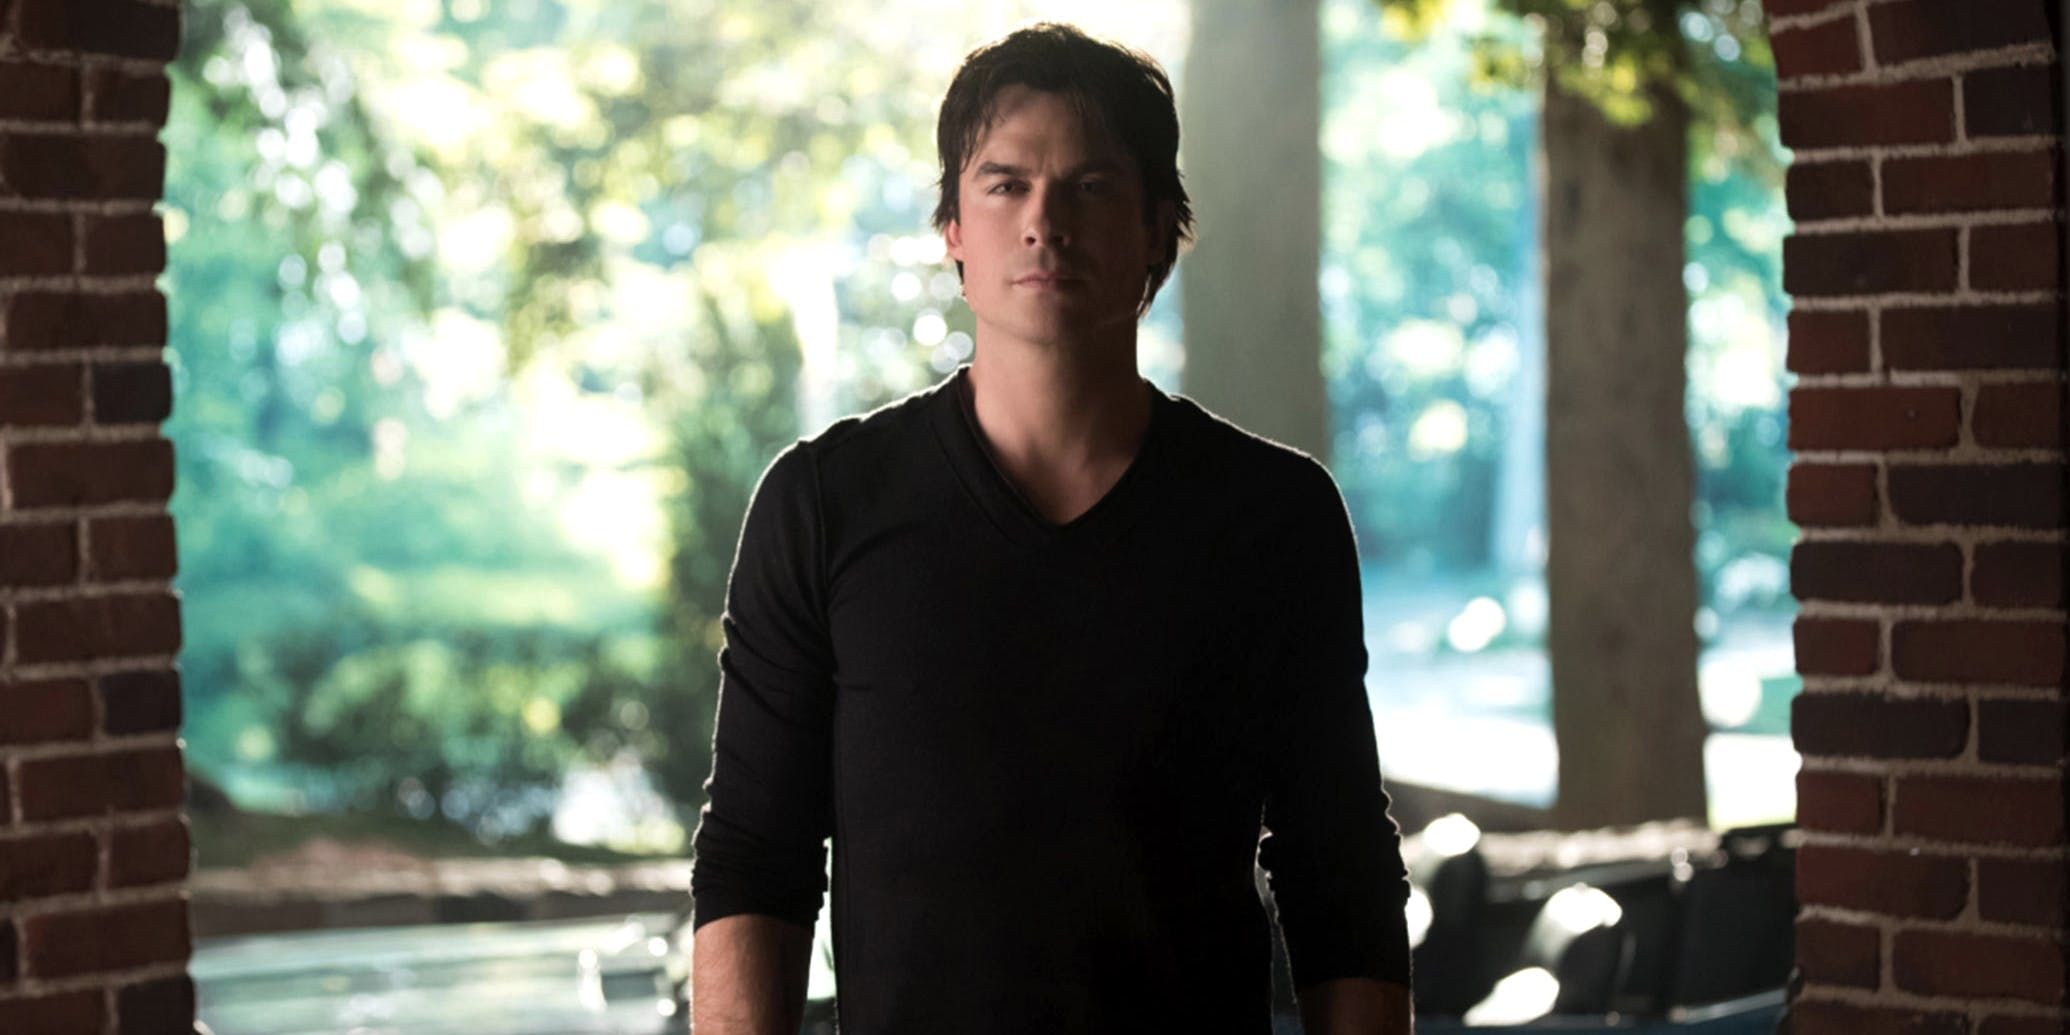 Damon standing in a porch looking on in The Vampire Diaries.